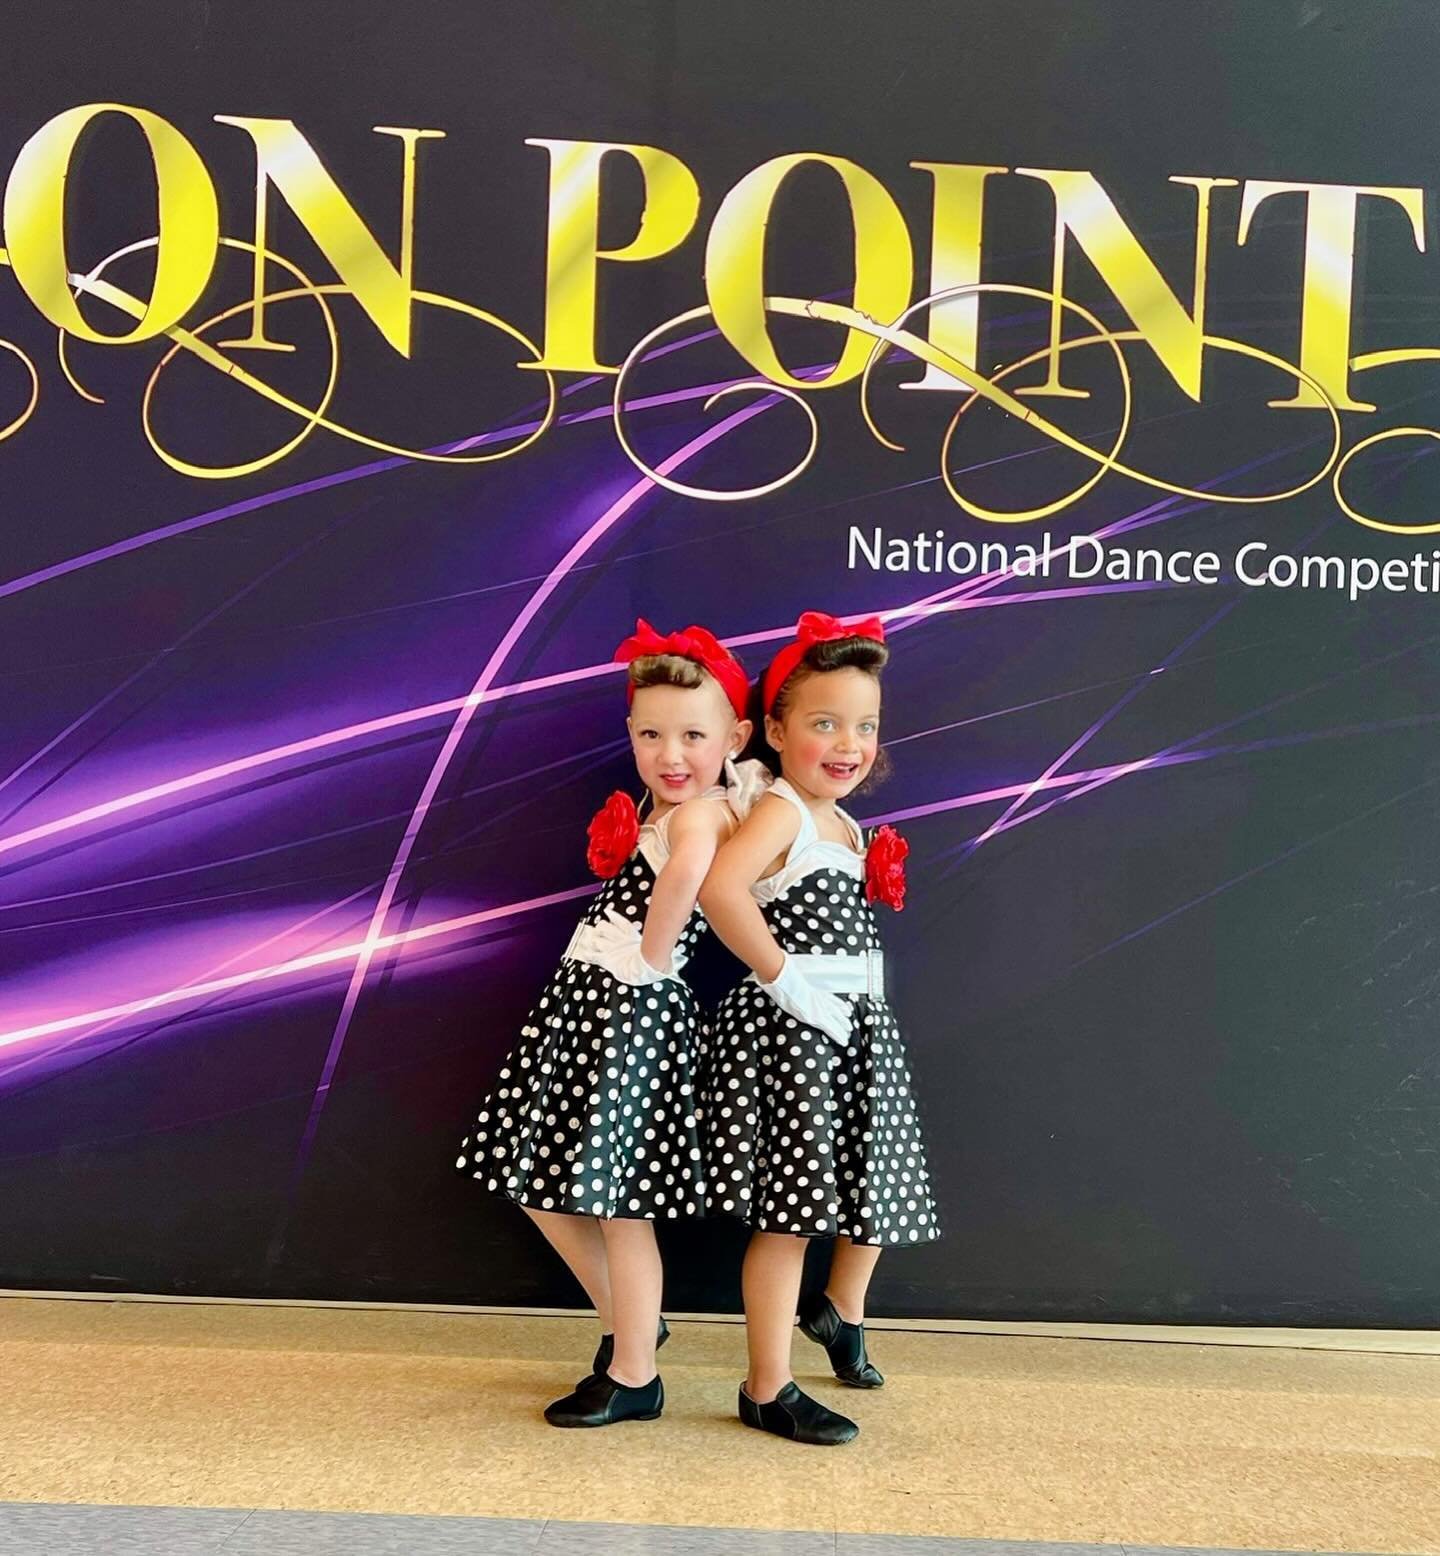 DAY 2️⃣ OVERALLS (pt1) @onpointdancecompetition 

INT MINIS
🥈 Duo/Trio &bull; Friendship
4th Small Group + 3rd Open &bull; Sweet

INT JUNIORS
10th Solo &bull; Invisible (Aubrey)
5th Duo/Trio &bull; Dancin&rsquo; Dan
4th Jr Group + 2nd Open &bull; St